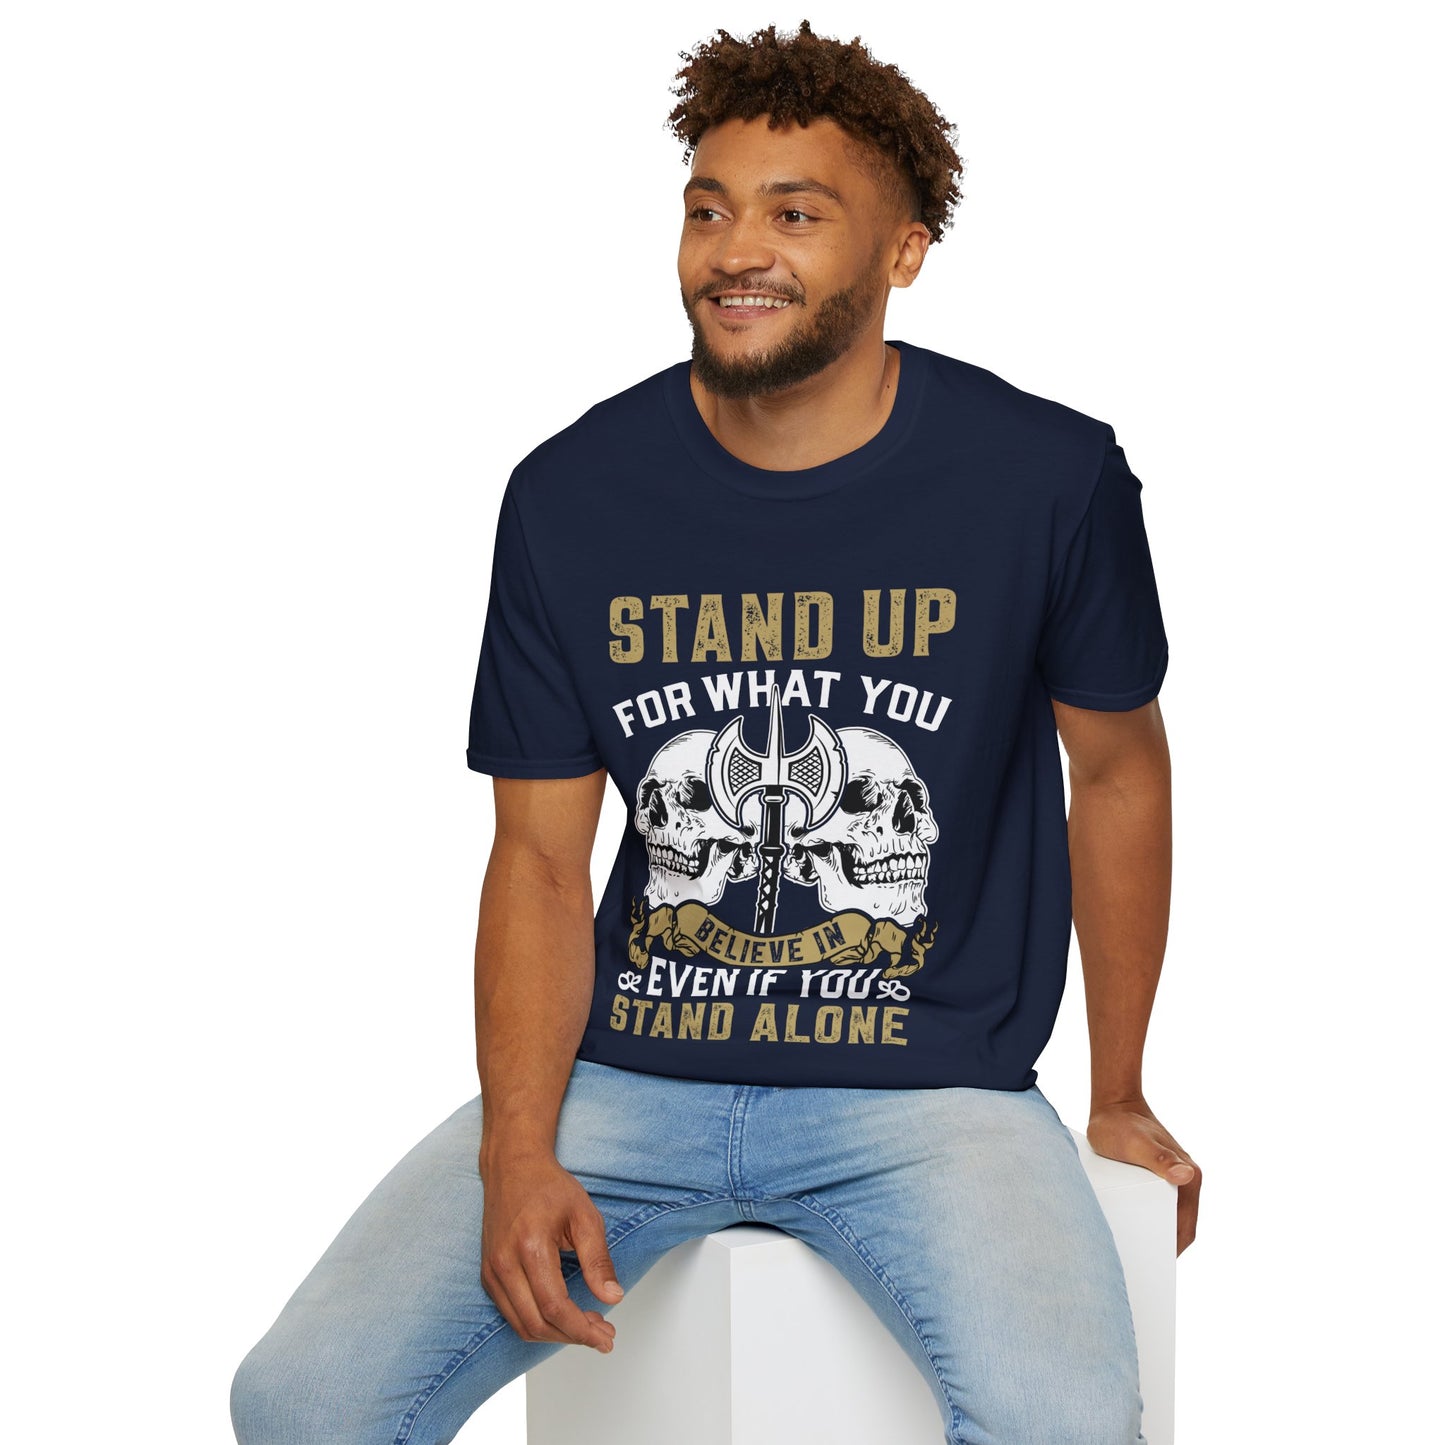 Stand Up For What You Believe In Even If You Stand Alone T-Shirt